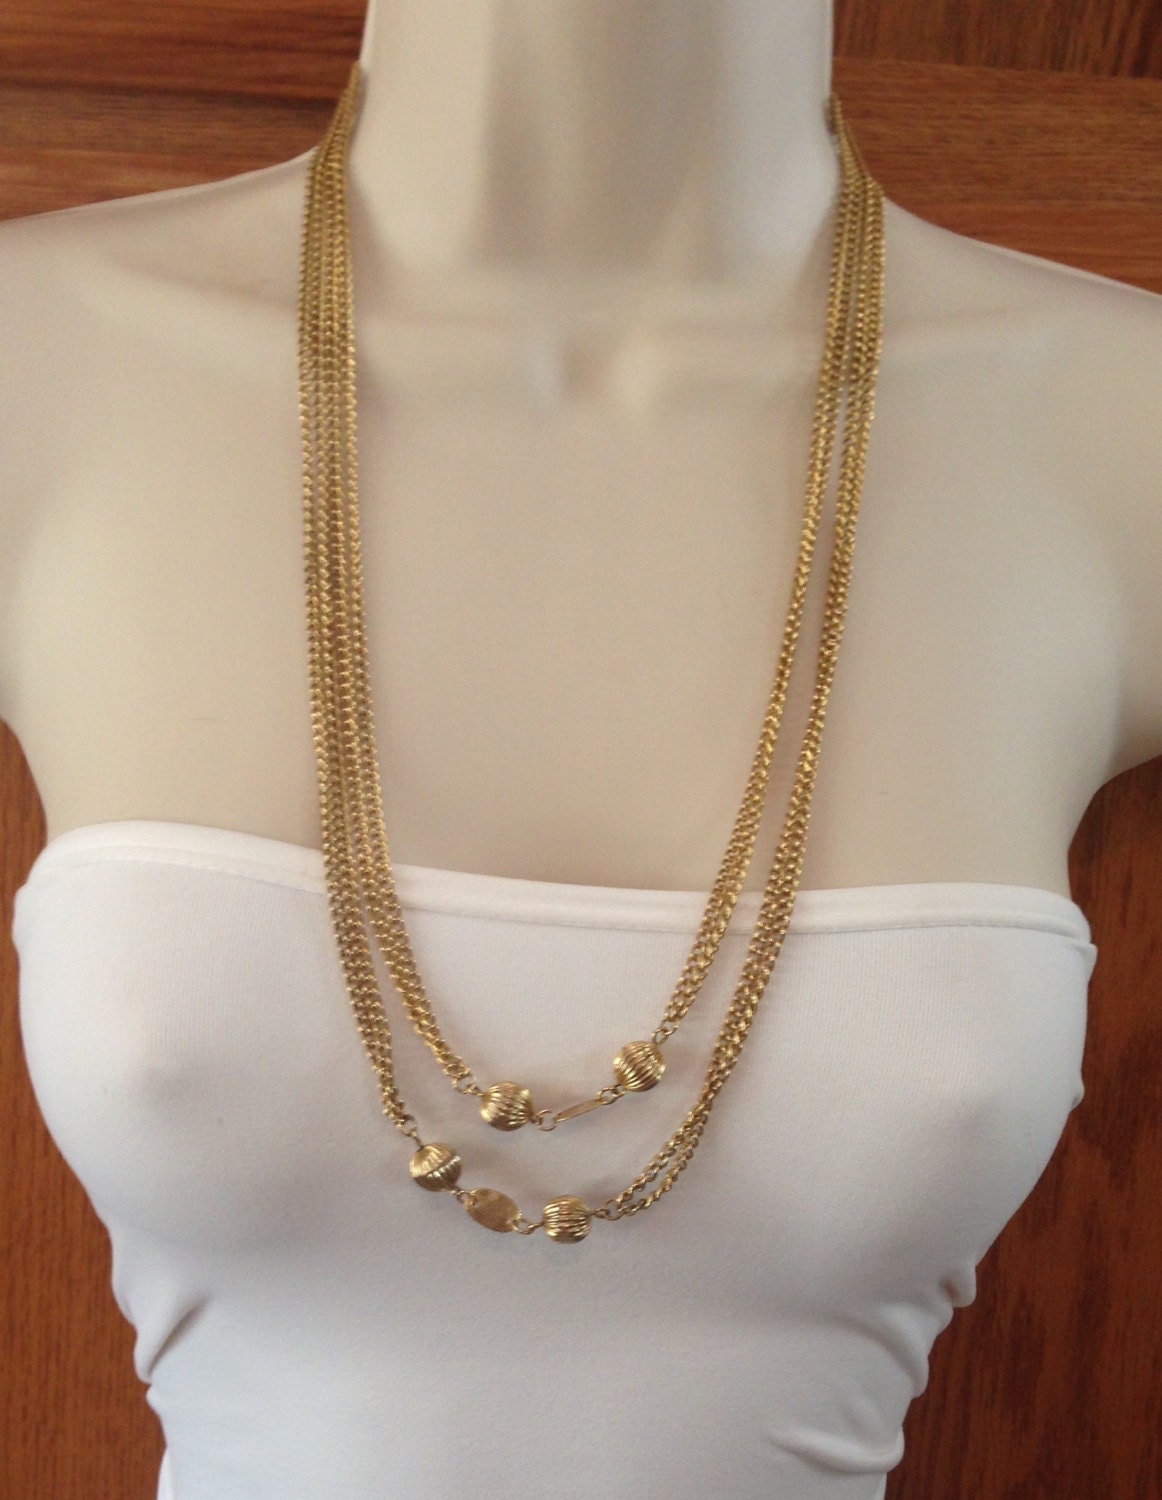 Vintage Extra Long Gold Chain Necklace 54.75 Inches Long with